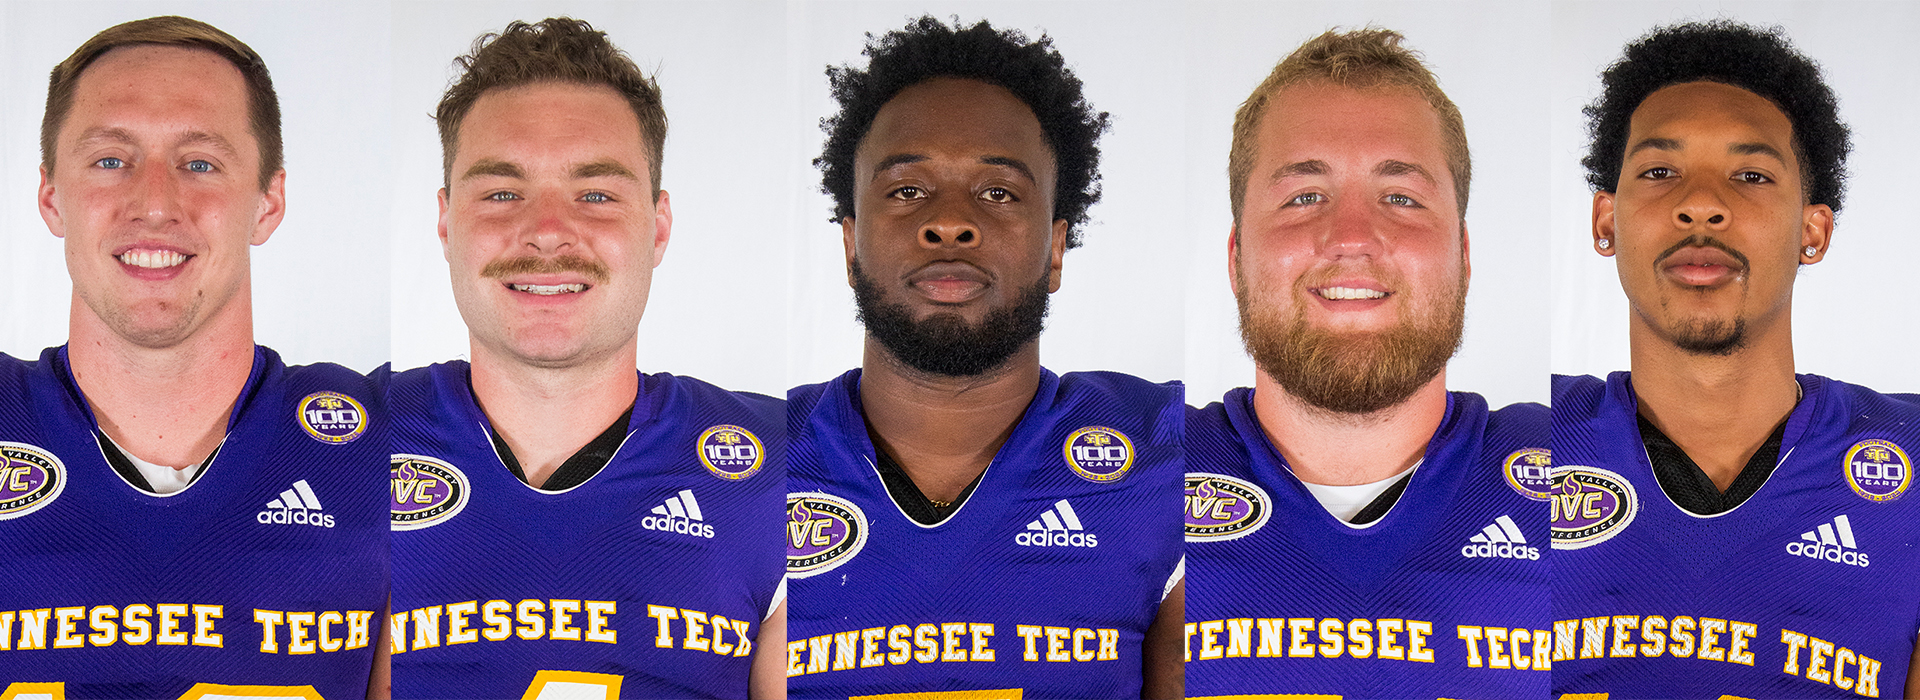 Five Golden Eagles named to NFF Hampshire Honor Society